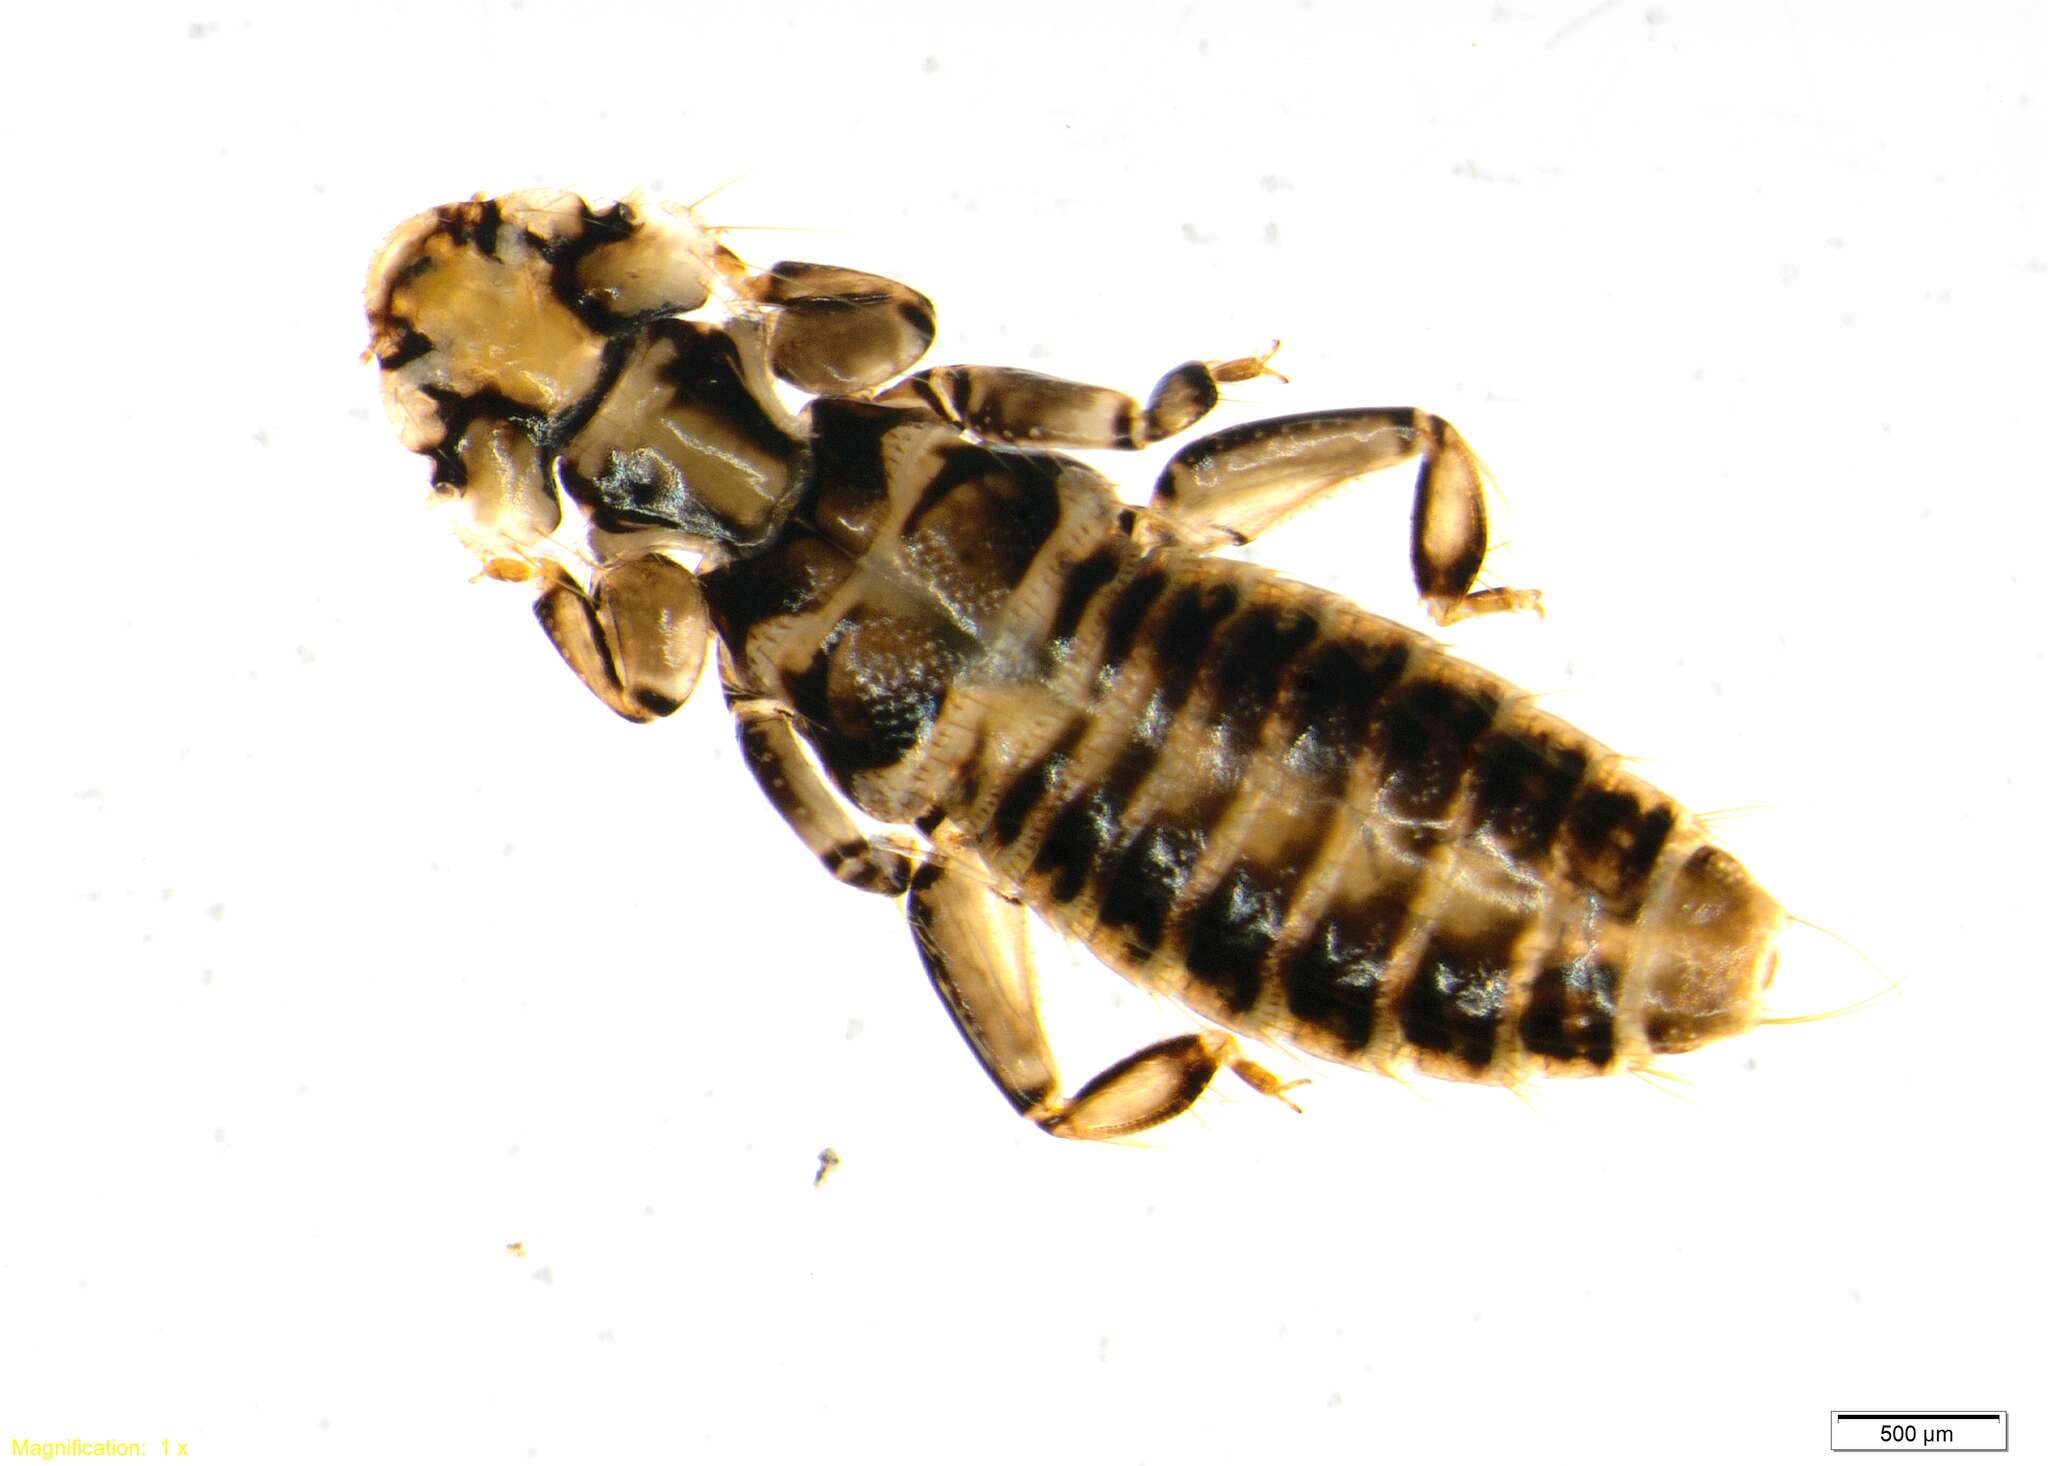 Image of Lice